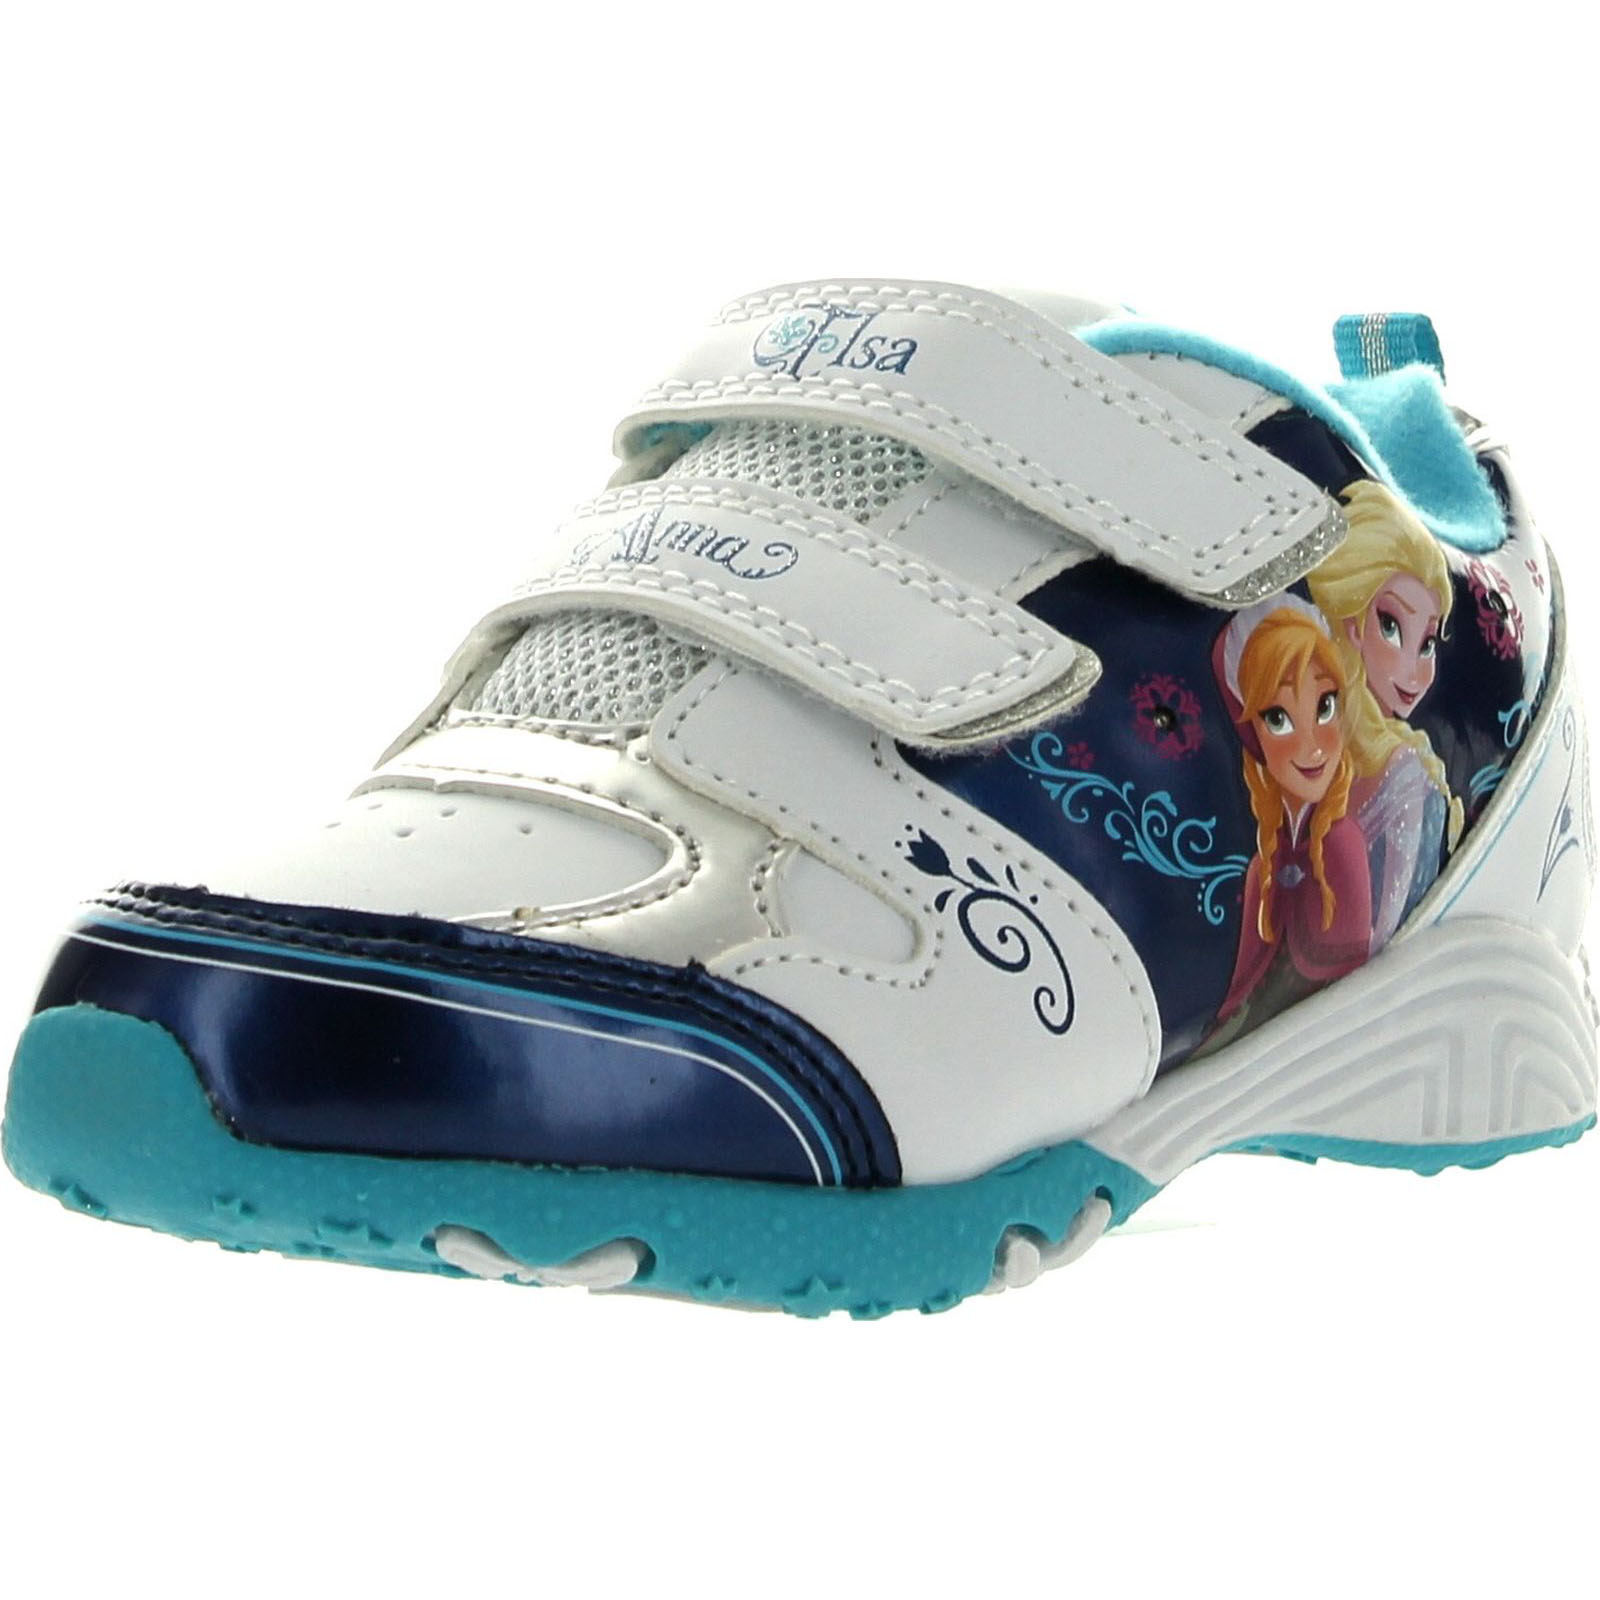 Disney Girls Frozen Princess Elsa and Anna Fashion Sneakers - image 1 of 4